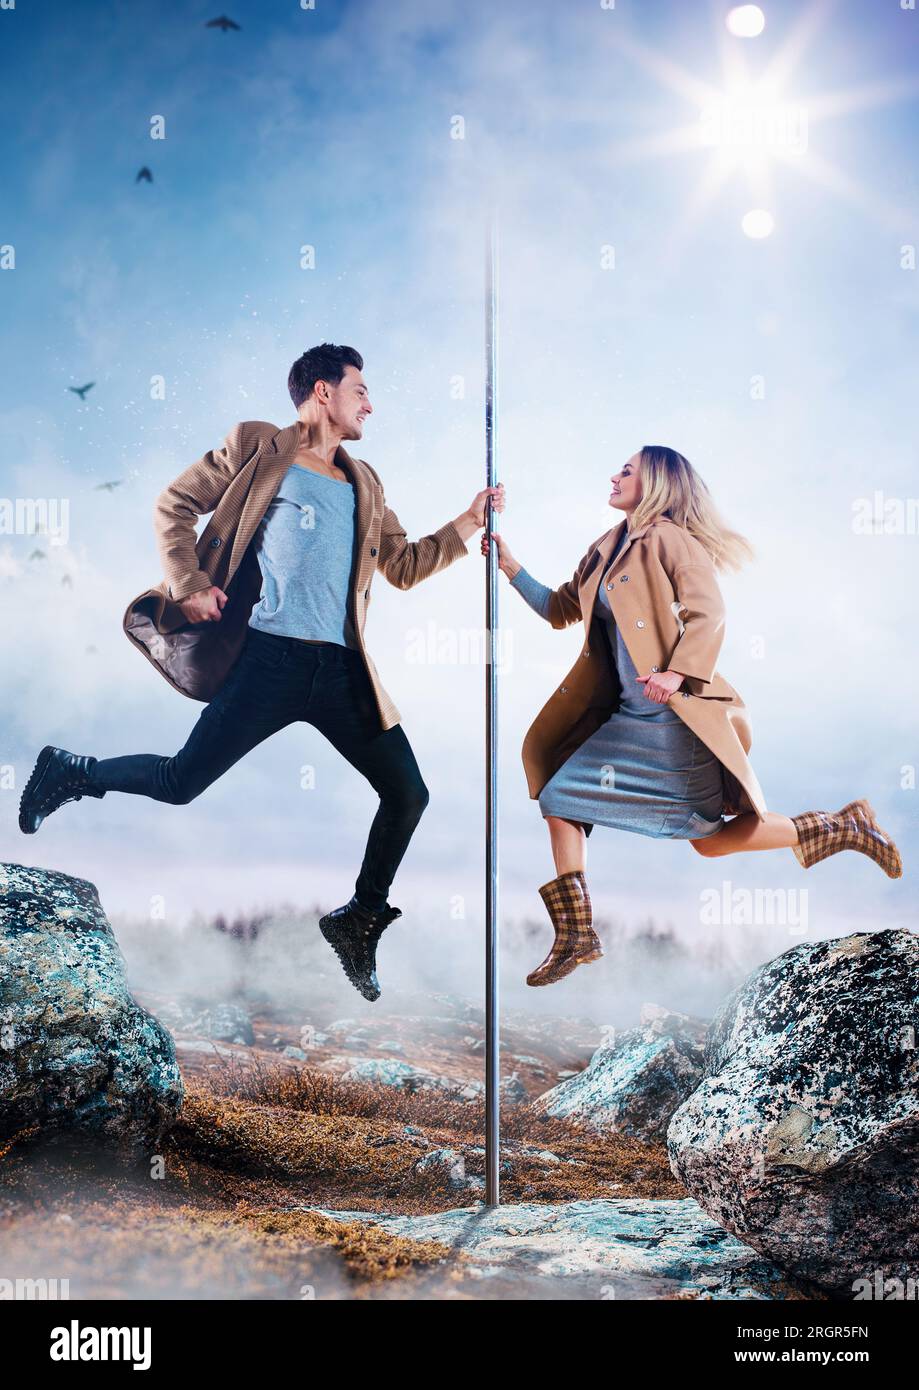 Young man and woman pole dancers in casual autumn clothing jumping, creative concept Stock Photo